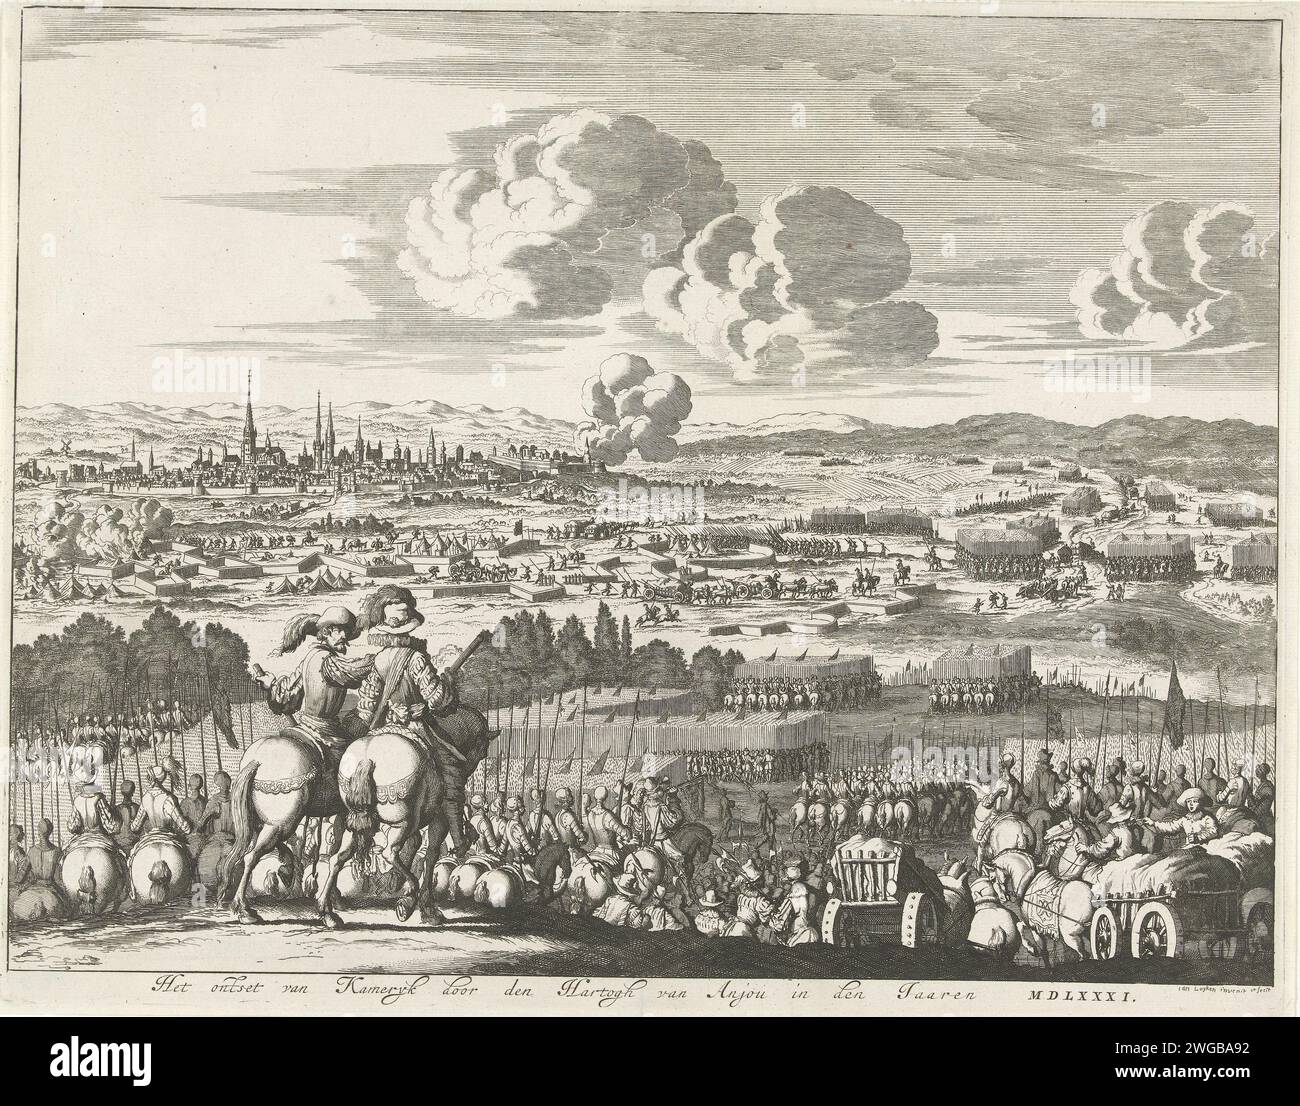 The relief of Kamerijk by the Duke of Anjou, 1581, 1680 print Kamerijk besieged by the Duke of Parma but relieved by the Duke of Anjou, August 16, 1581. View of the city from the position of Anjou's army, in the foreground two field lords on horseback. The Parma troops leave their racks around the city. Amsterdam paper etching raising the siege with outside assistance, relief Cambrai Stock Photo